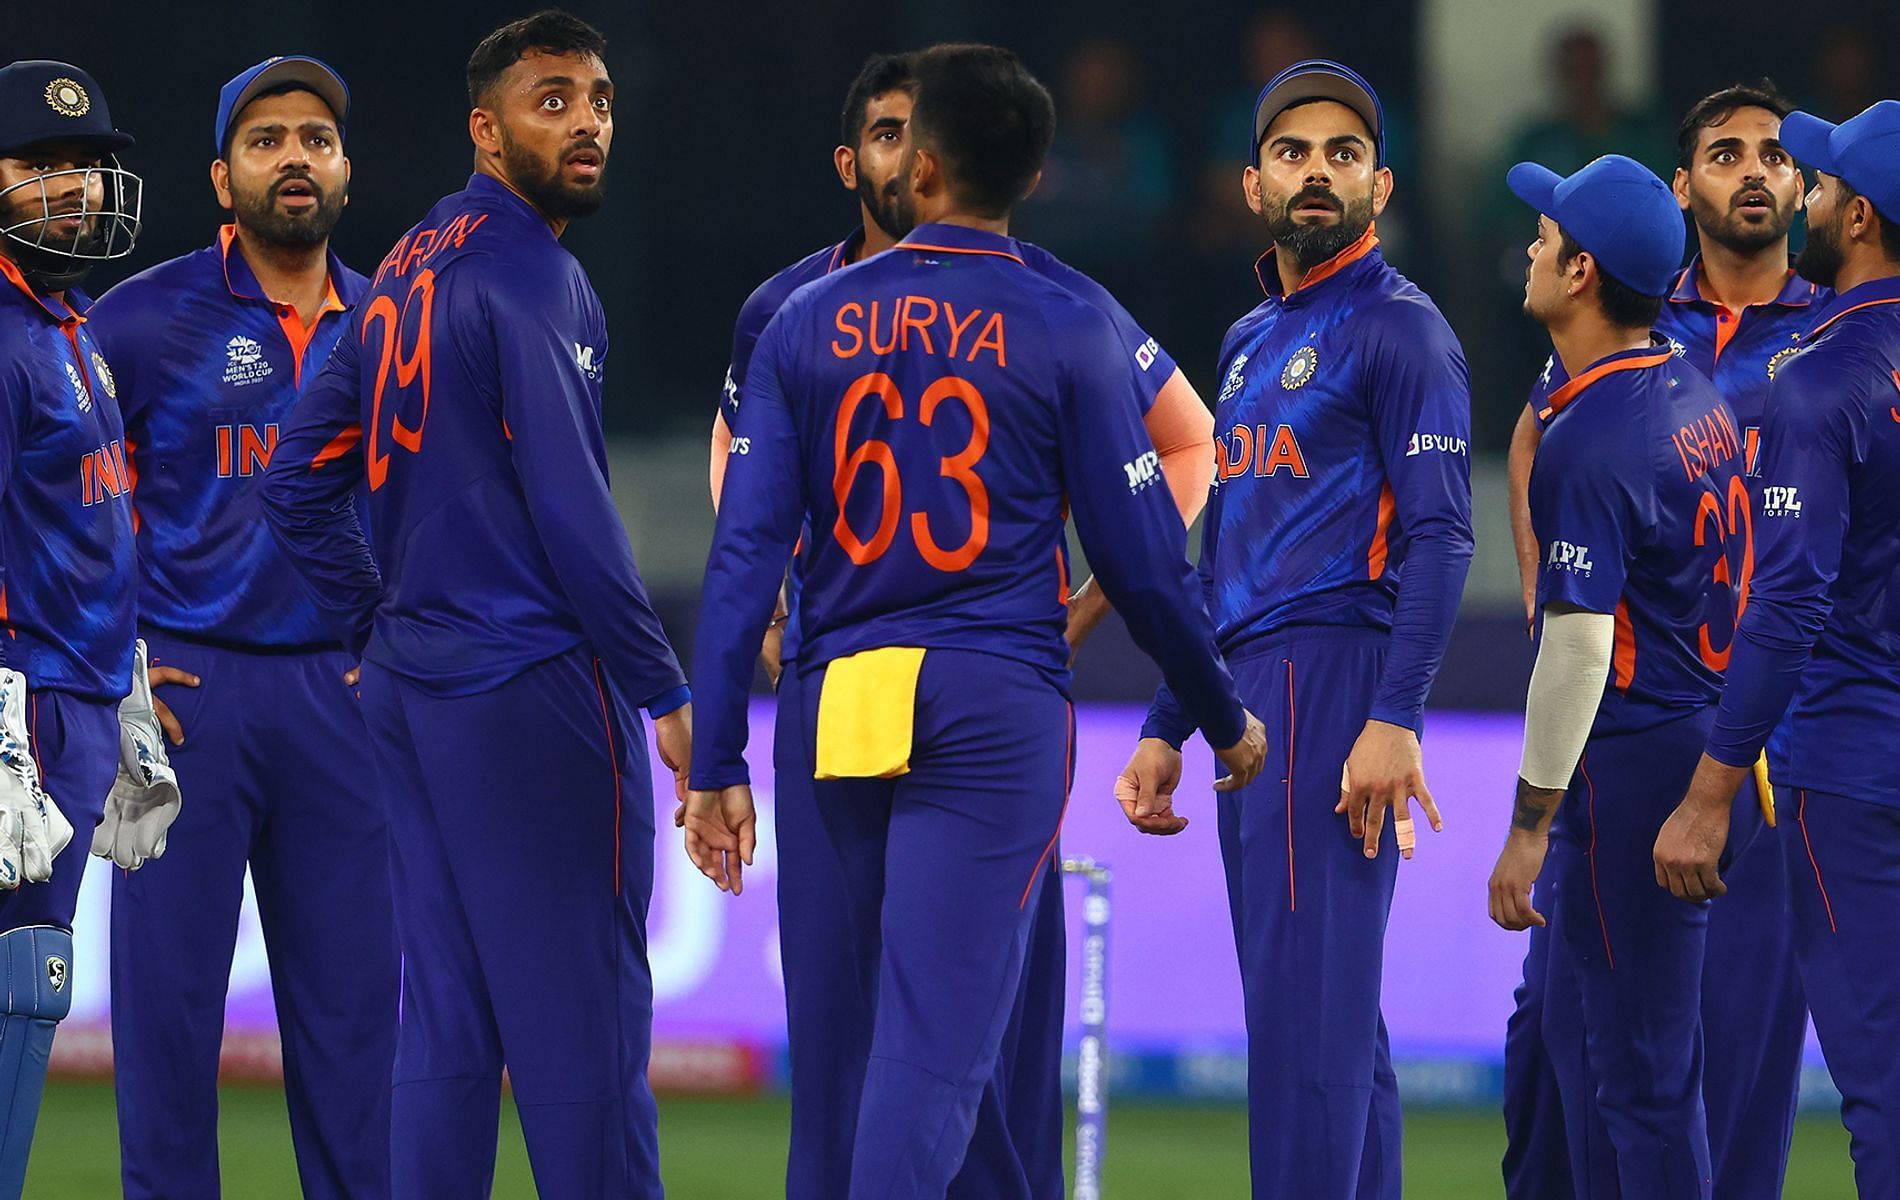 T20 World Cup: India lost their first two matches against Pakistan and New Zealand.